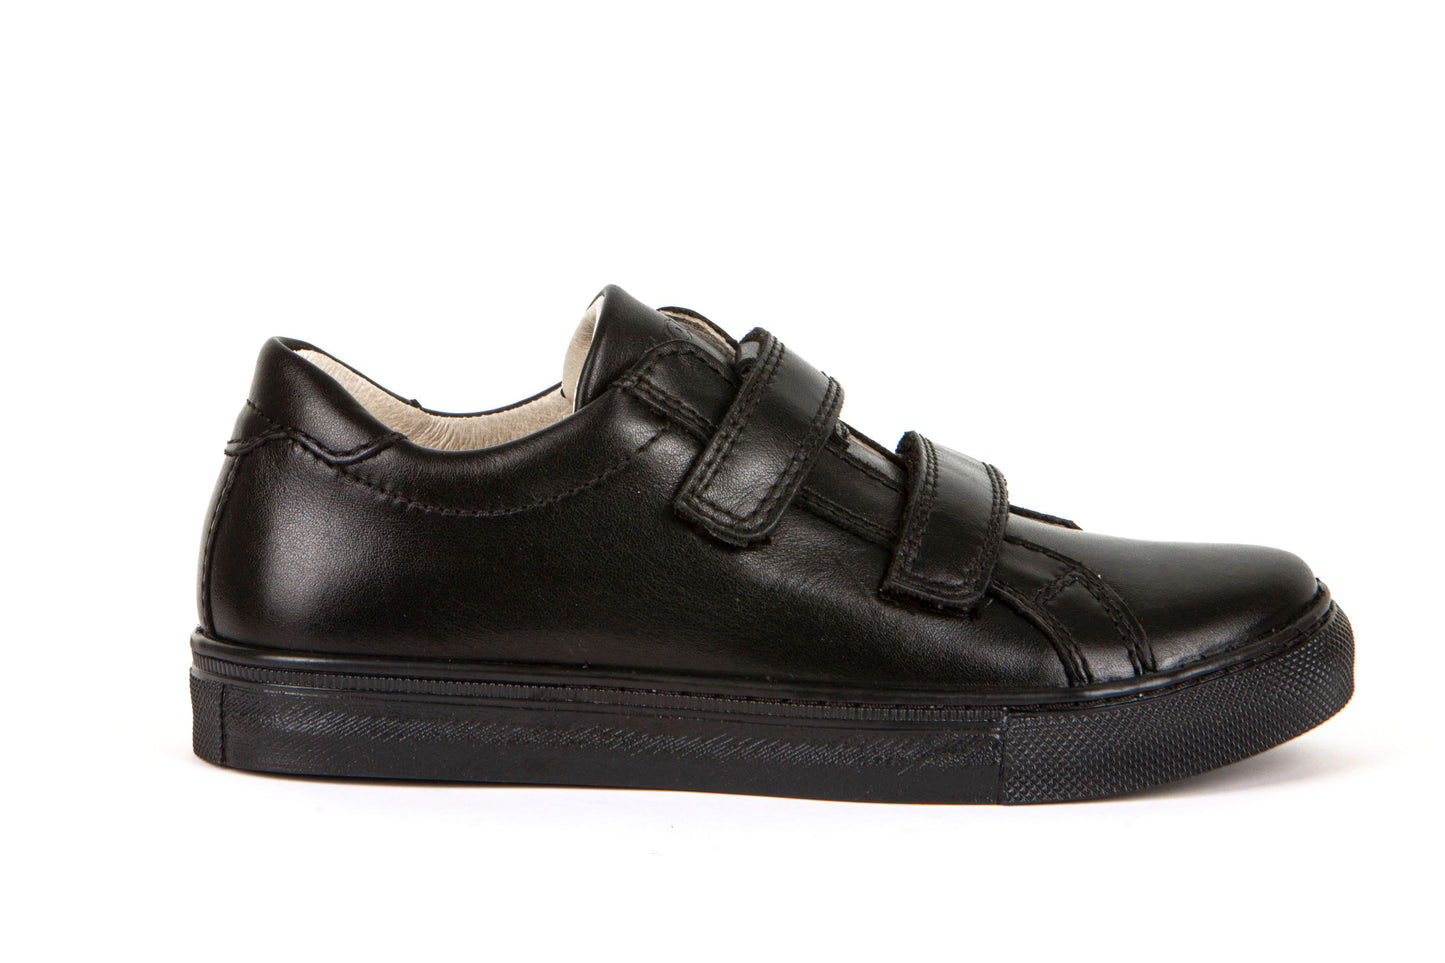 A boys casual school shoe by Froddo, style Morgan D in black with velcro fastening. Right side view.